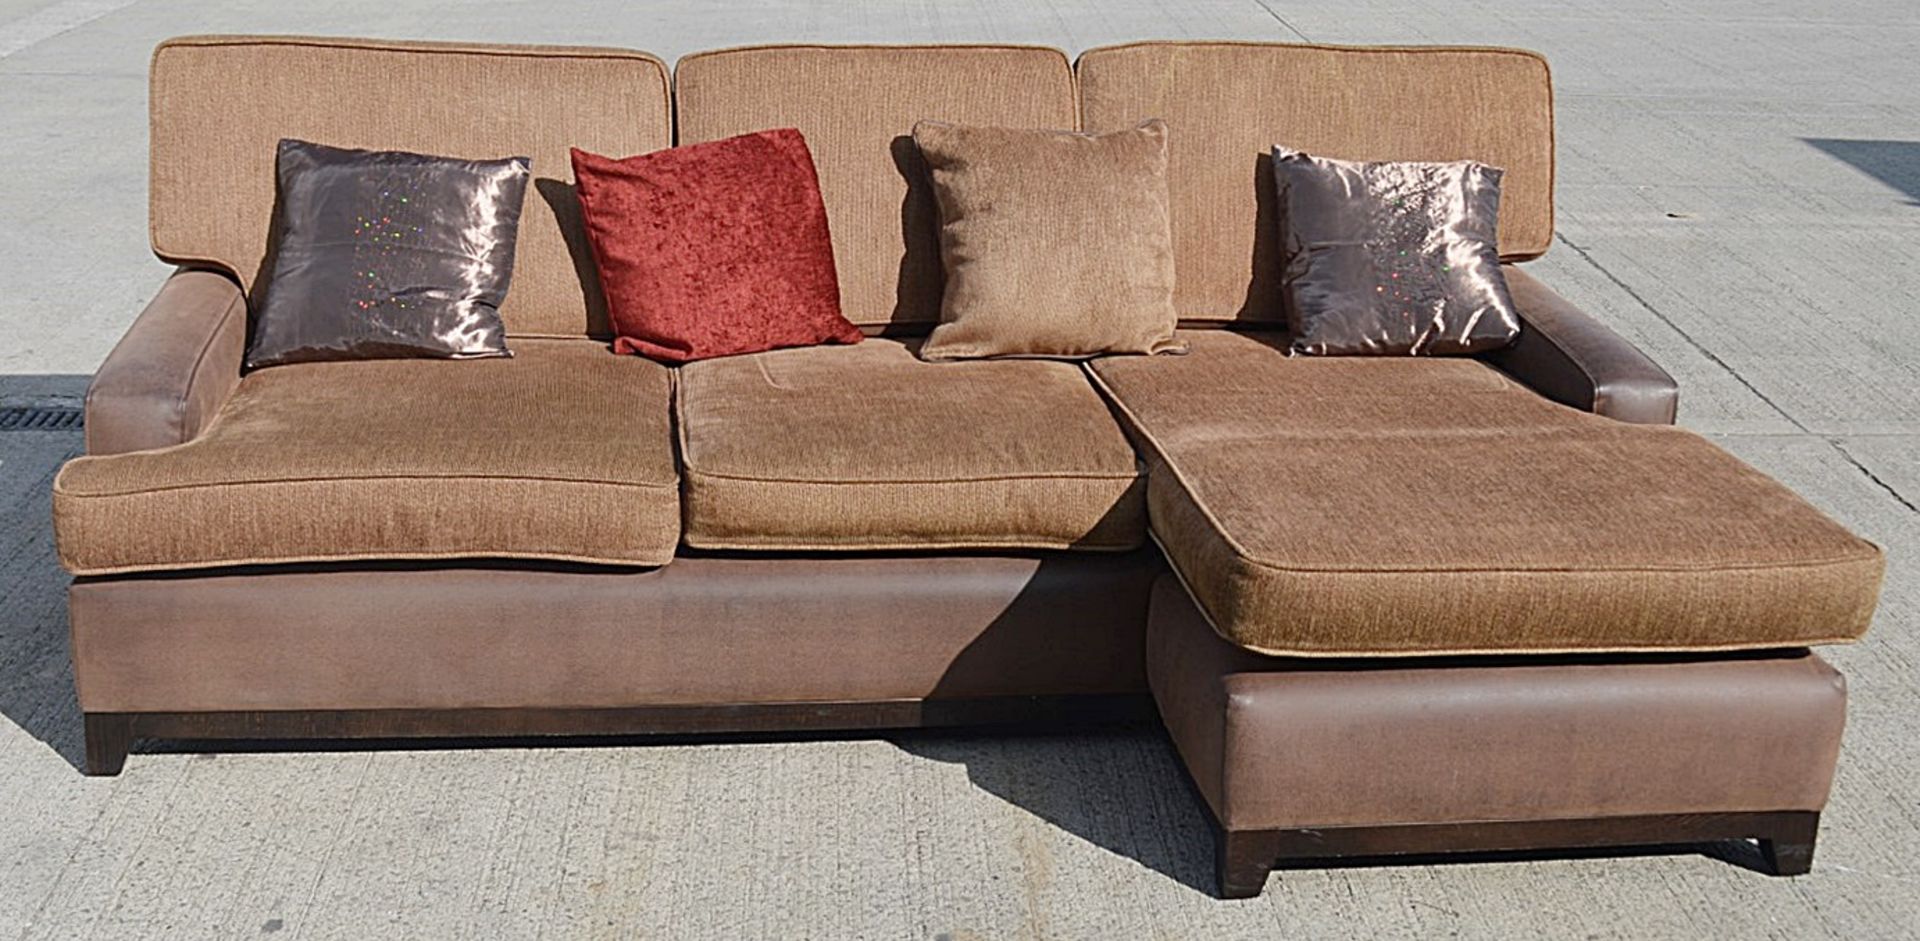 A Pair Of 2.5 Metre Wide Corner Sofas - Dimensions: W250 x D155 x D90cm / Seat Height 47cm - - Image 15 of 21